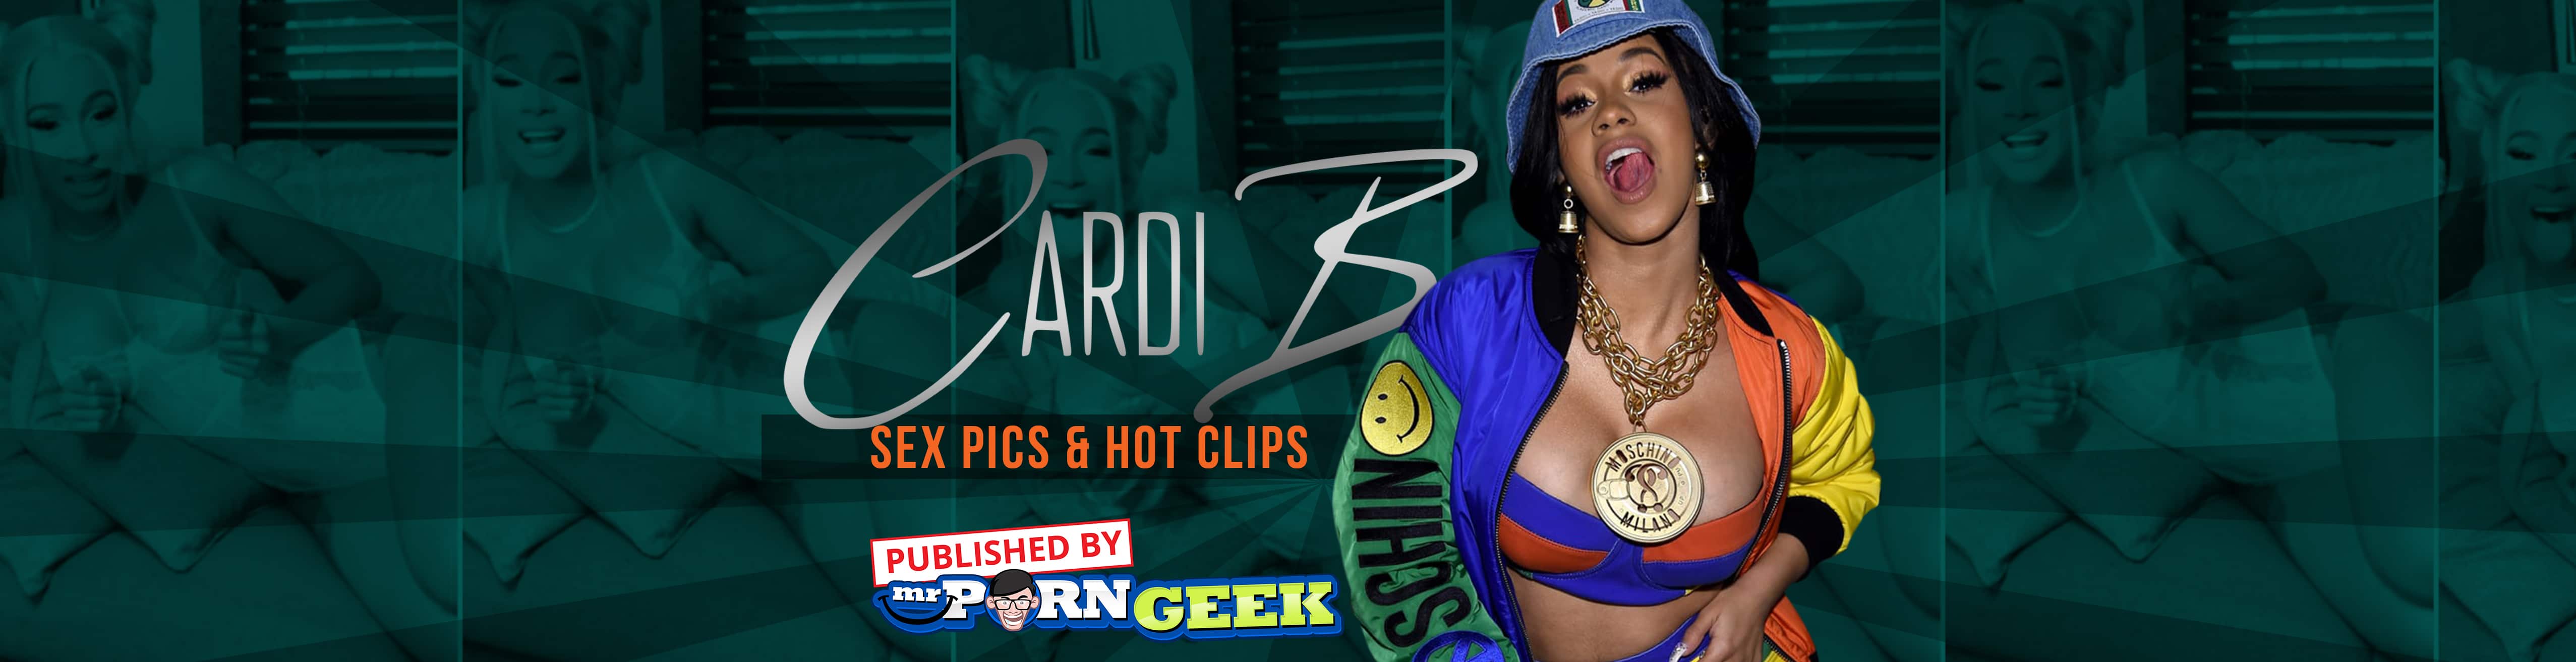 Find Cardi B Nudes, Sex Pics and Porn Clips On MrPornGeek